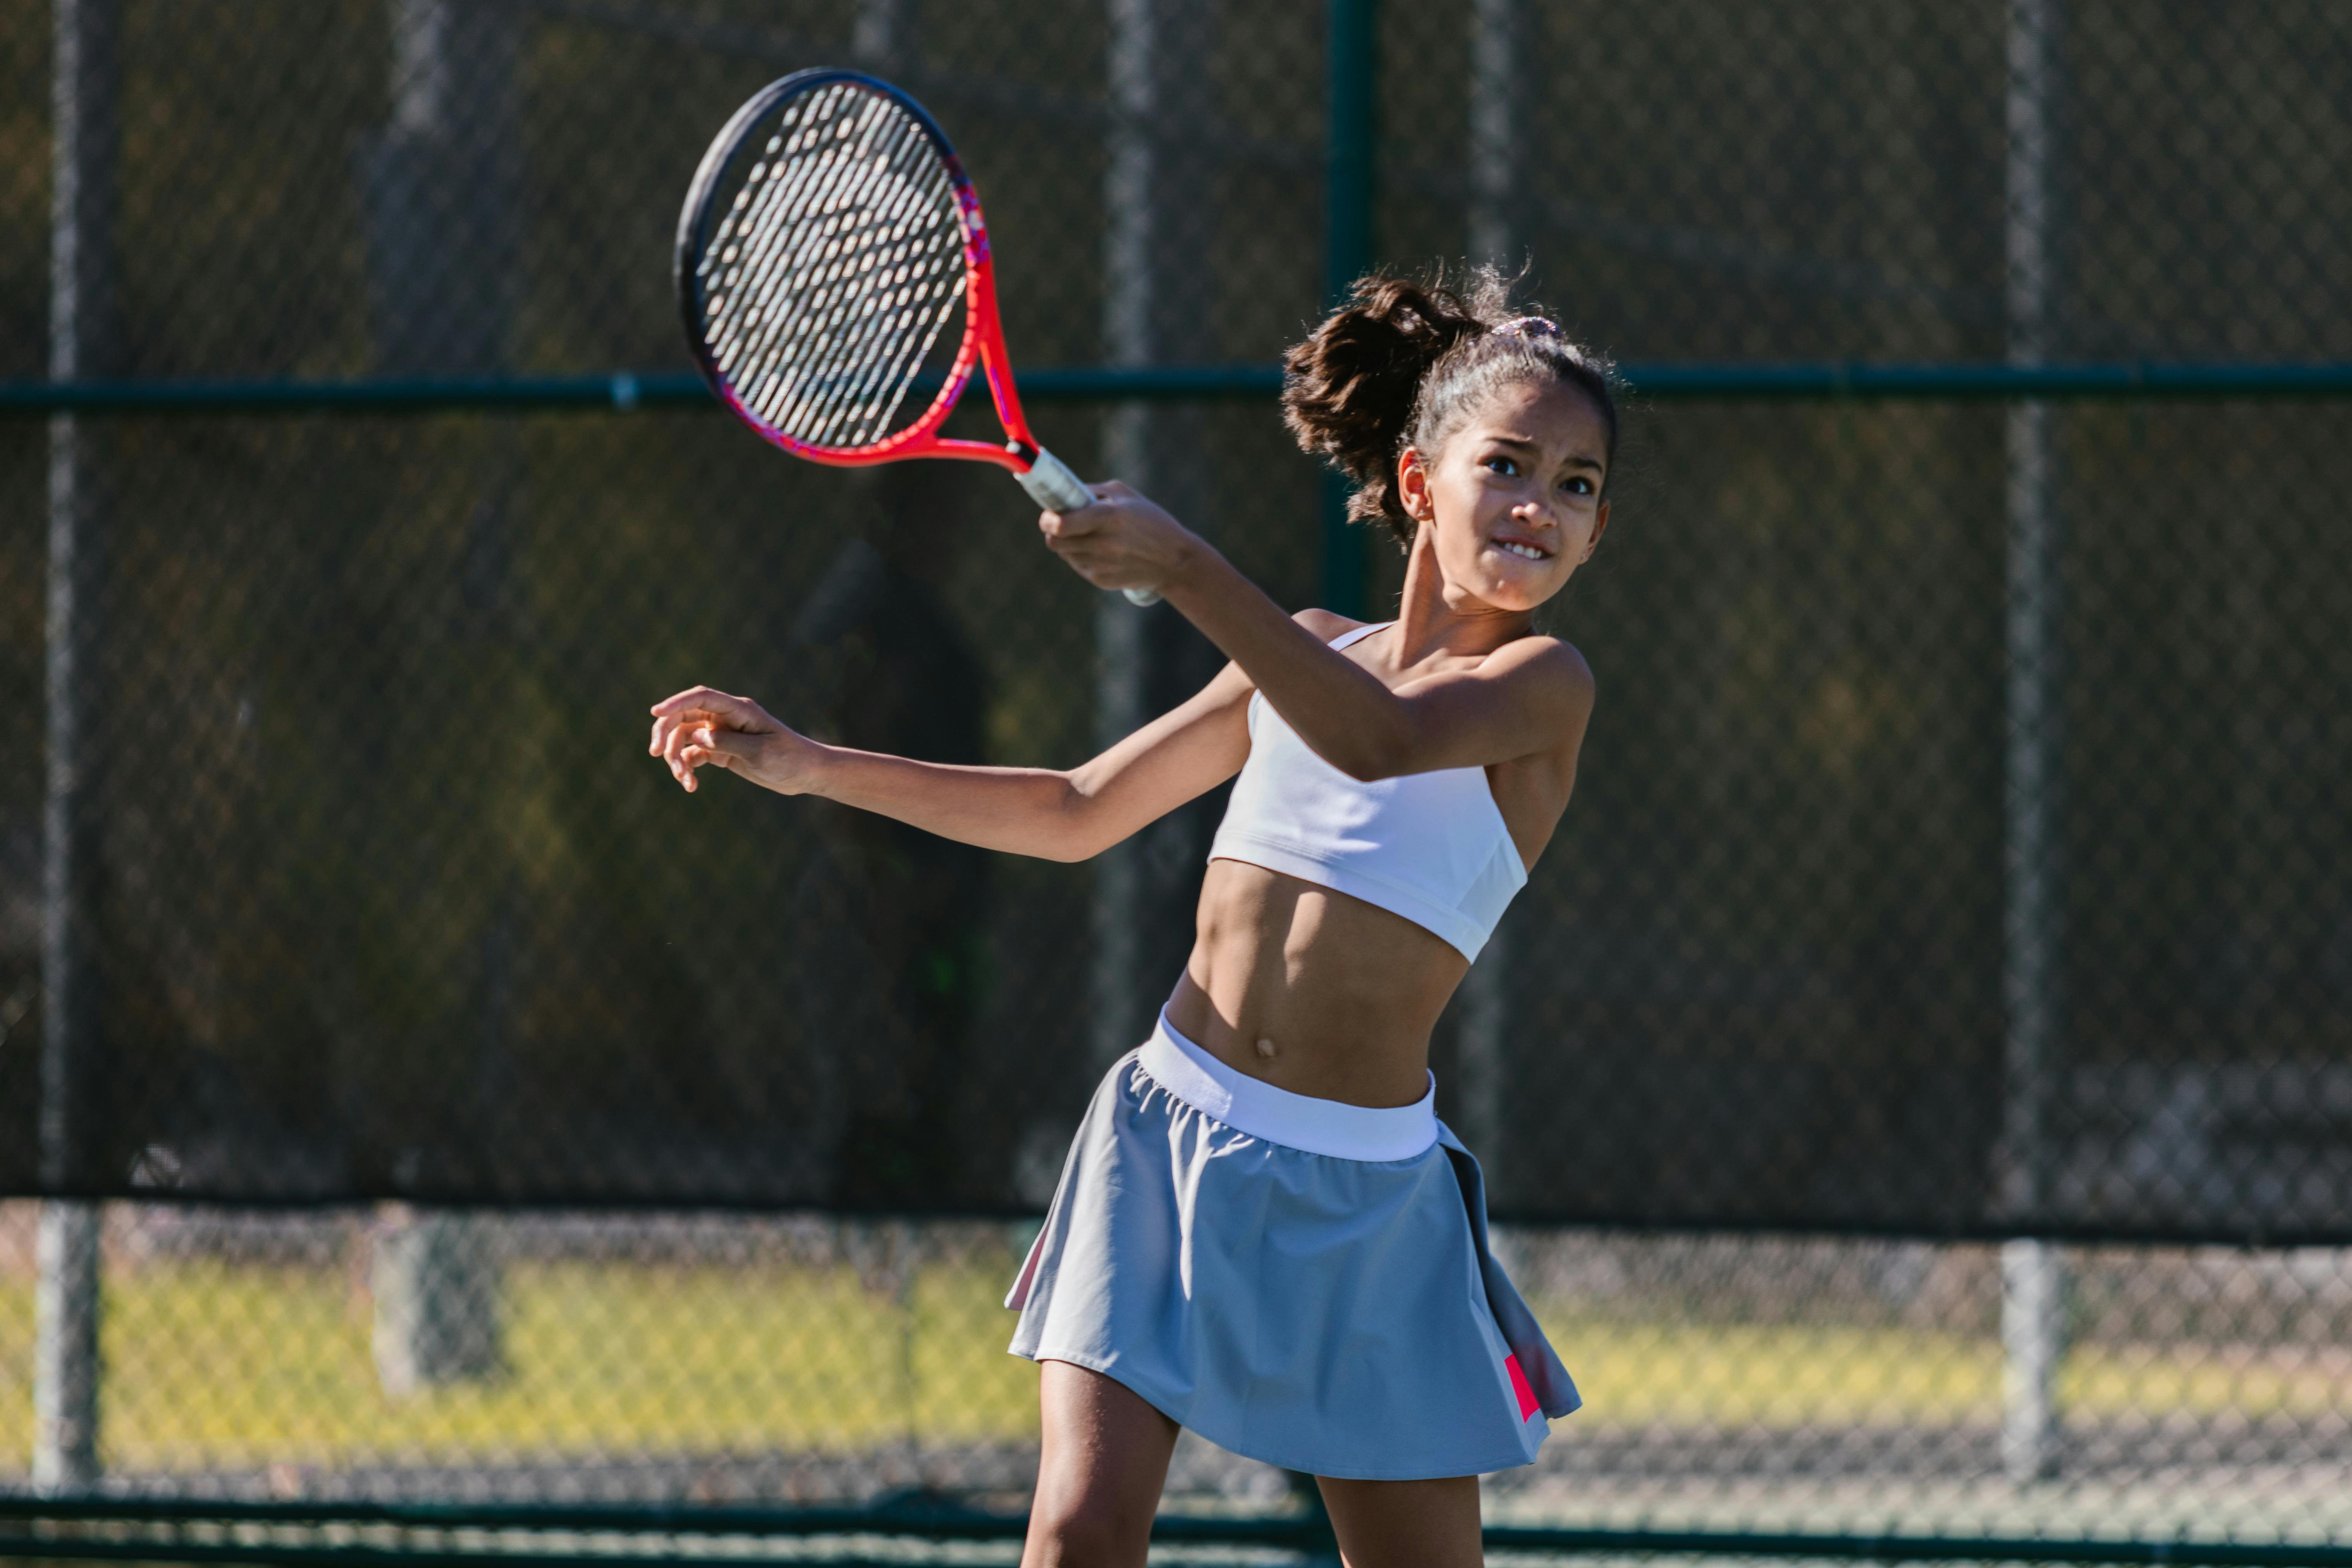 A girl playing tennis | Source: Pexels